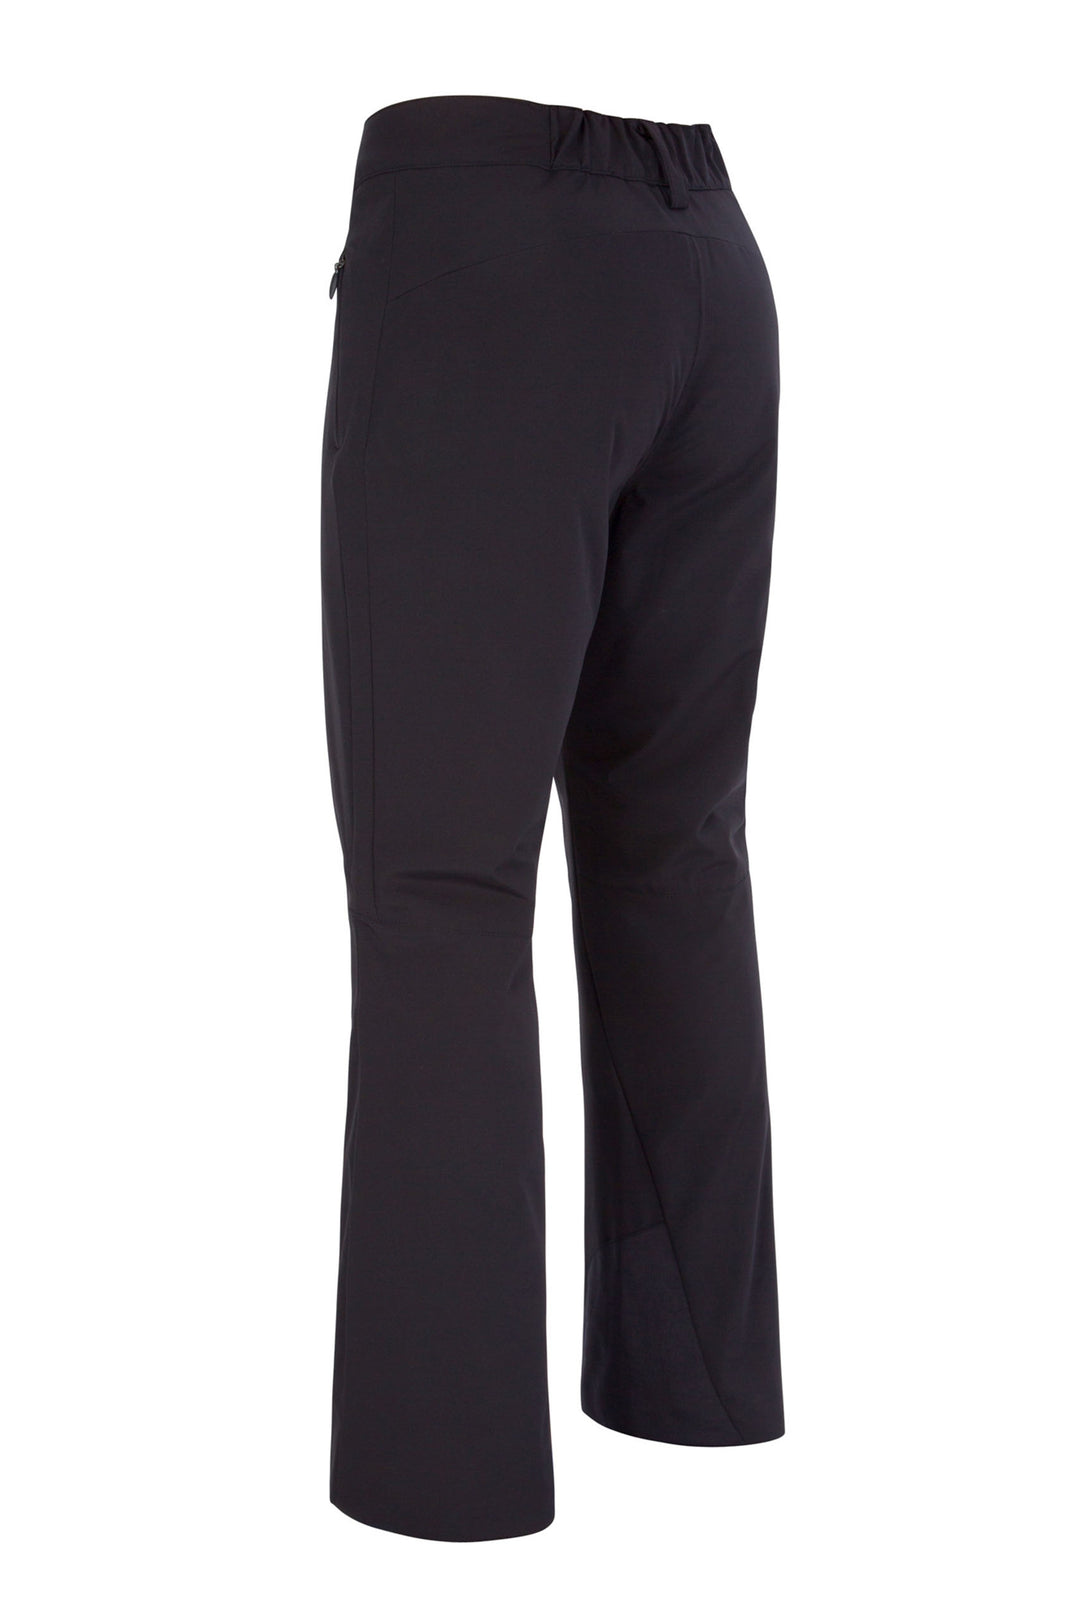 GIFTED 🎁Lucy Perfect Core Pant  Lucy activewear, Core pants, Clothes  design